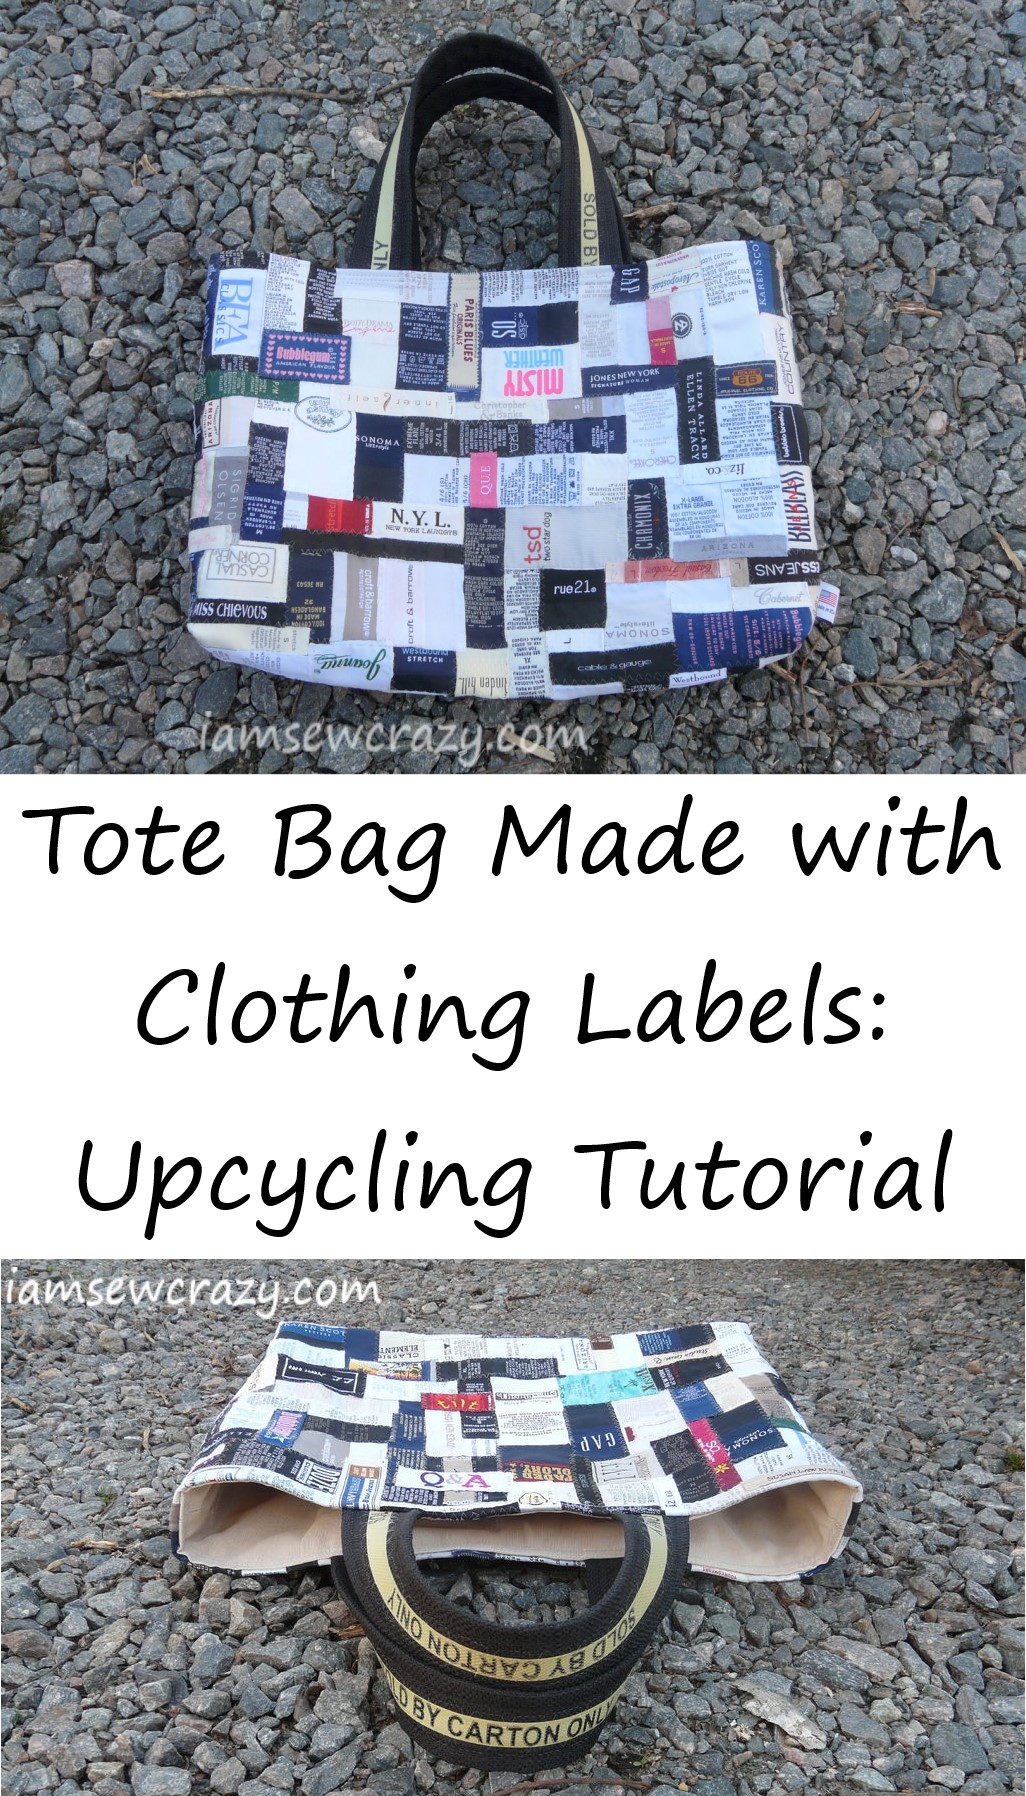 Upcycled tote bag made with clothing labels